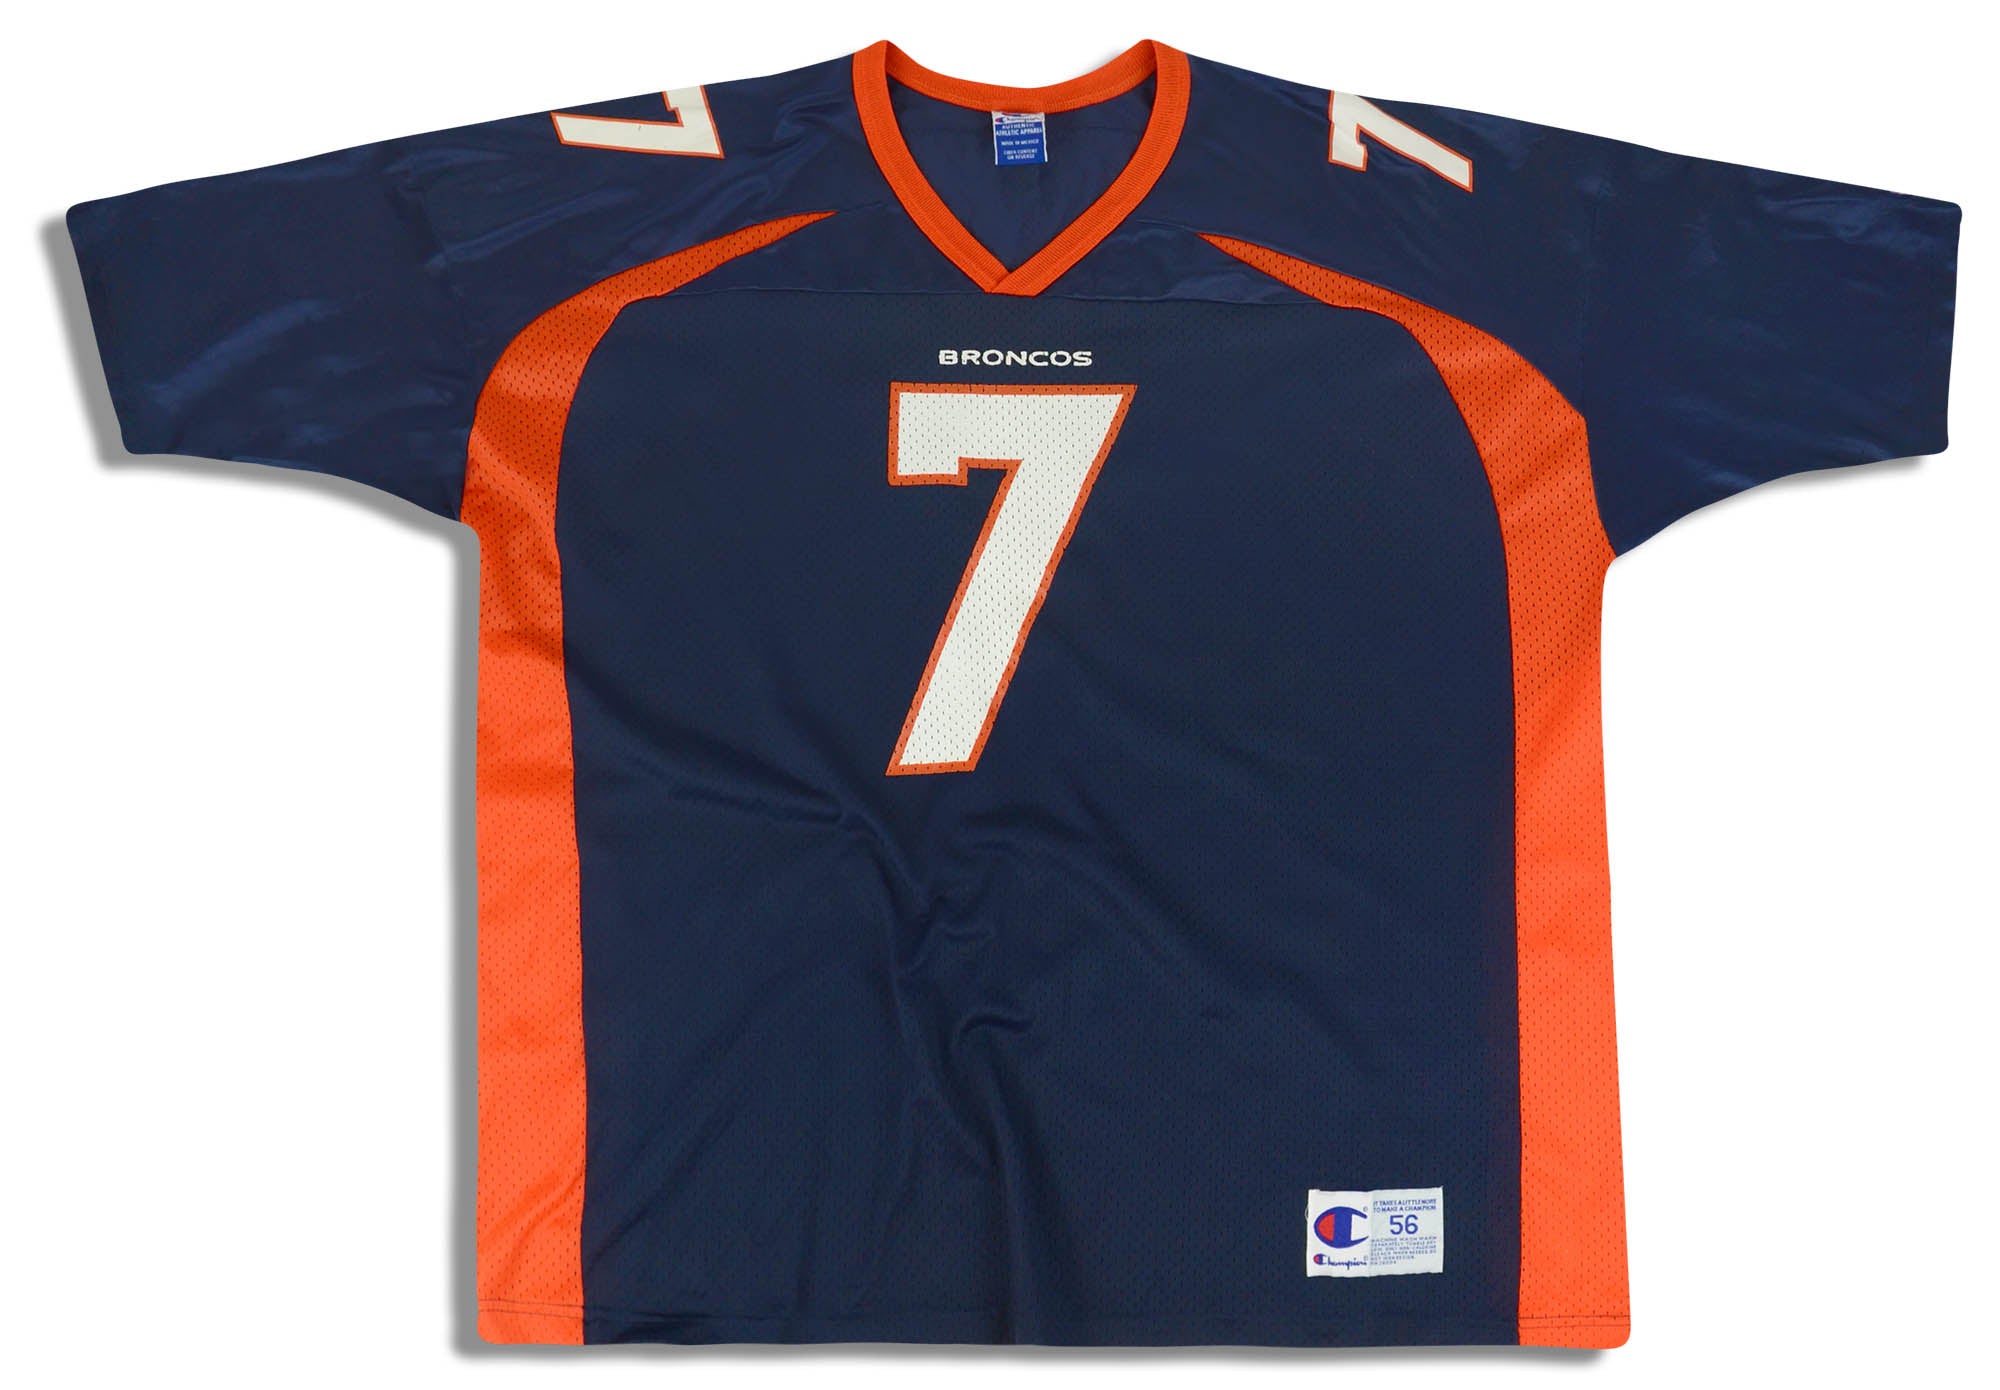 1997-98 DENVER BRONCOS ELWAY #7 CHAMPION JERSEY (HOME) 3XL - Classic  American Sports